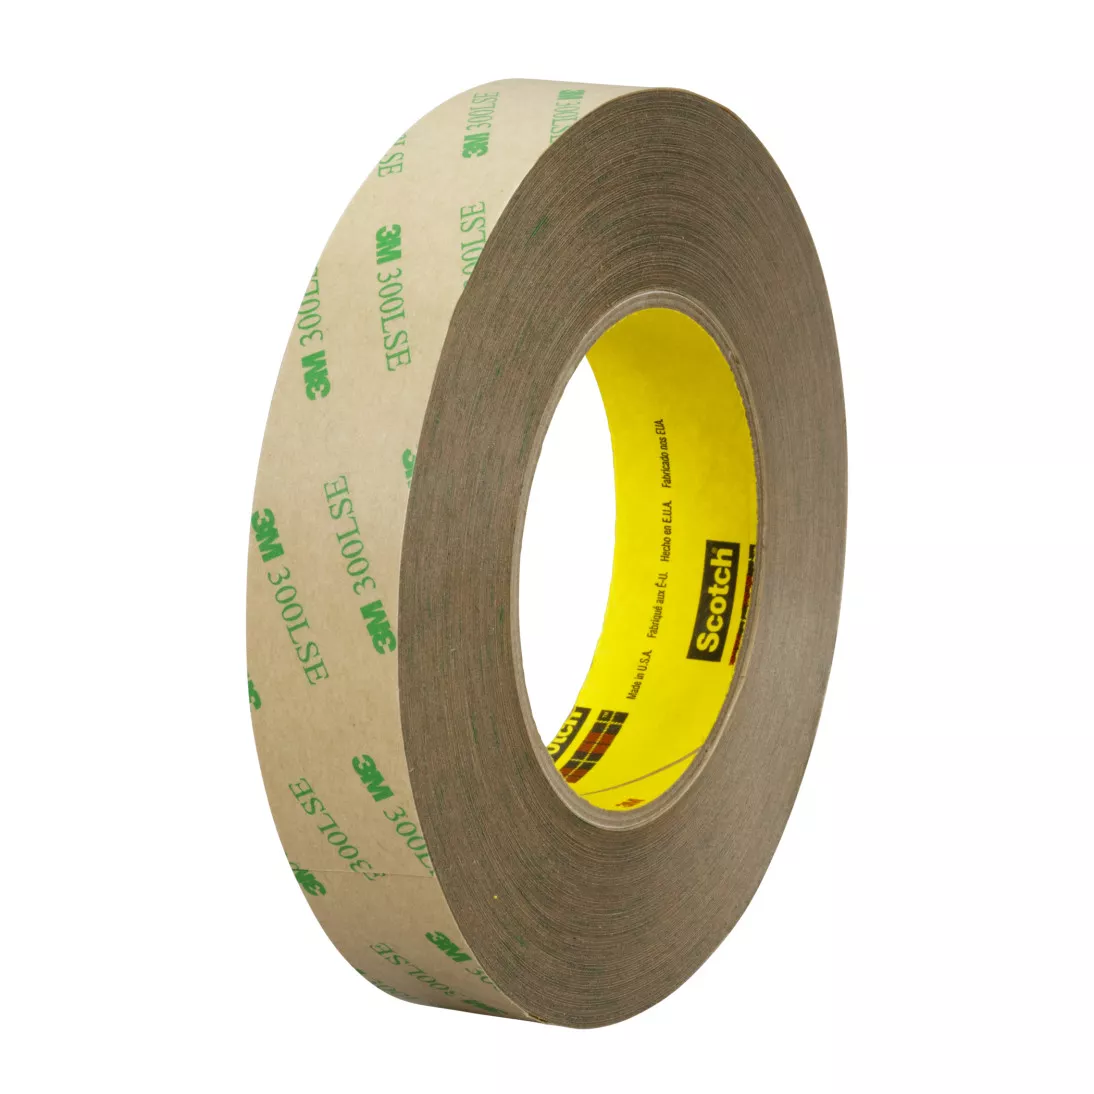 3M™ Double Coated Tape 93010LE, Clear, 54 in x 180 yd, 3.9 mil, 1 roll
per case